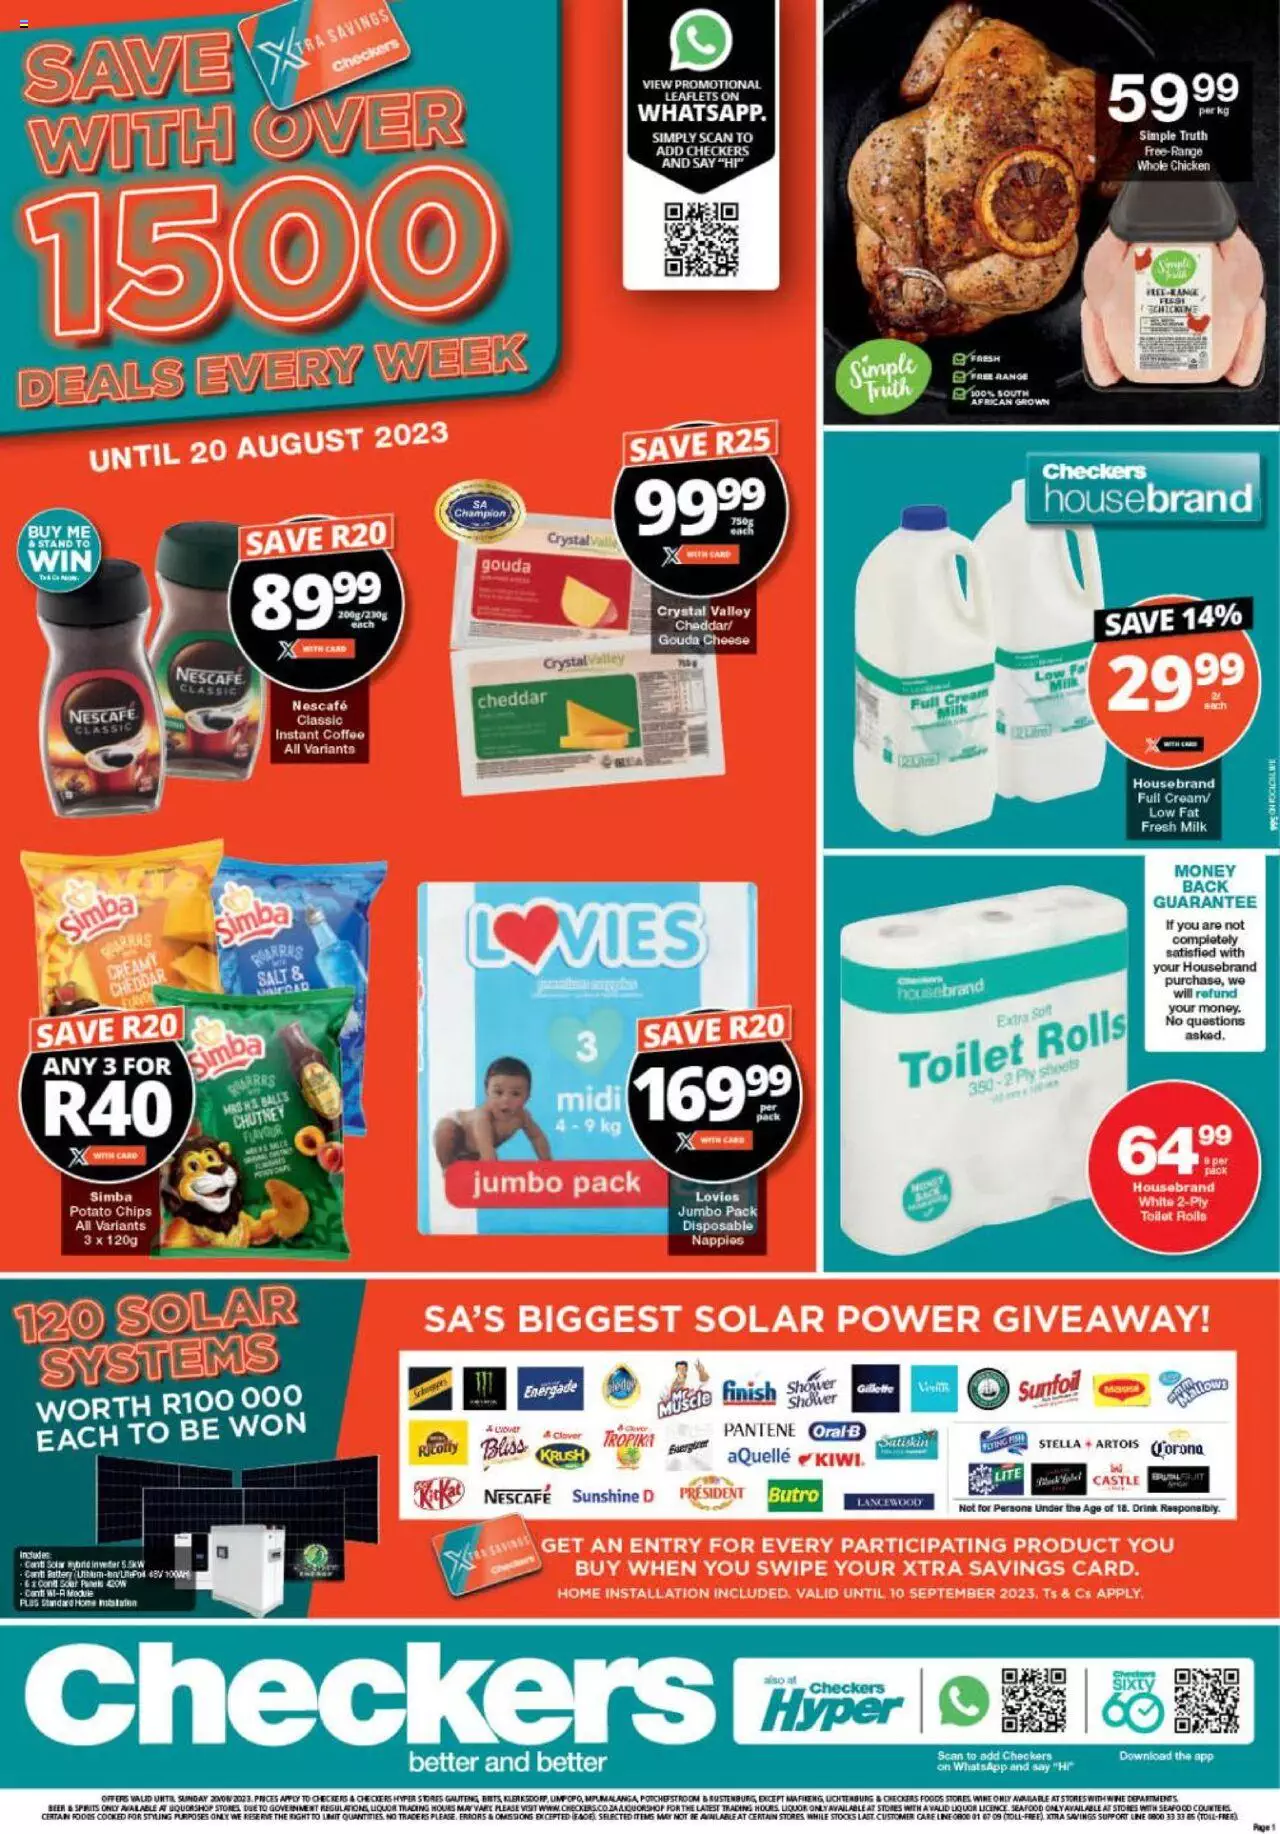 Checkers Specials 17 – 20 August 2023